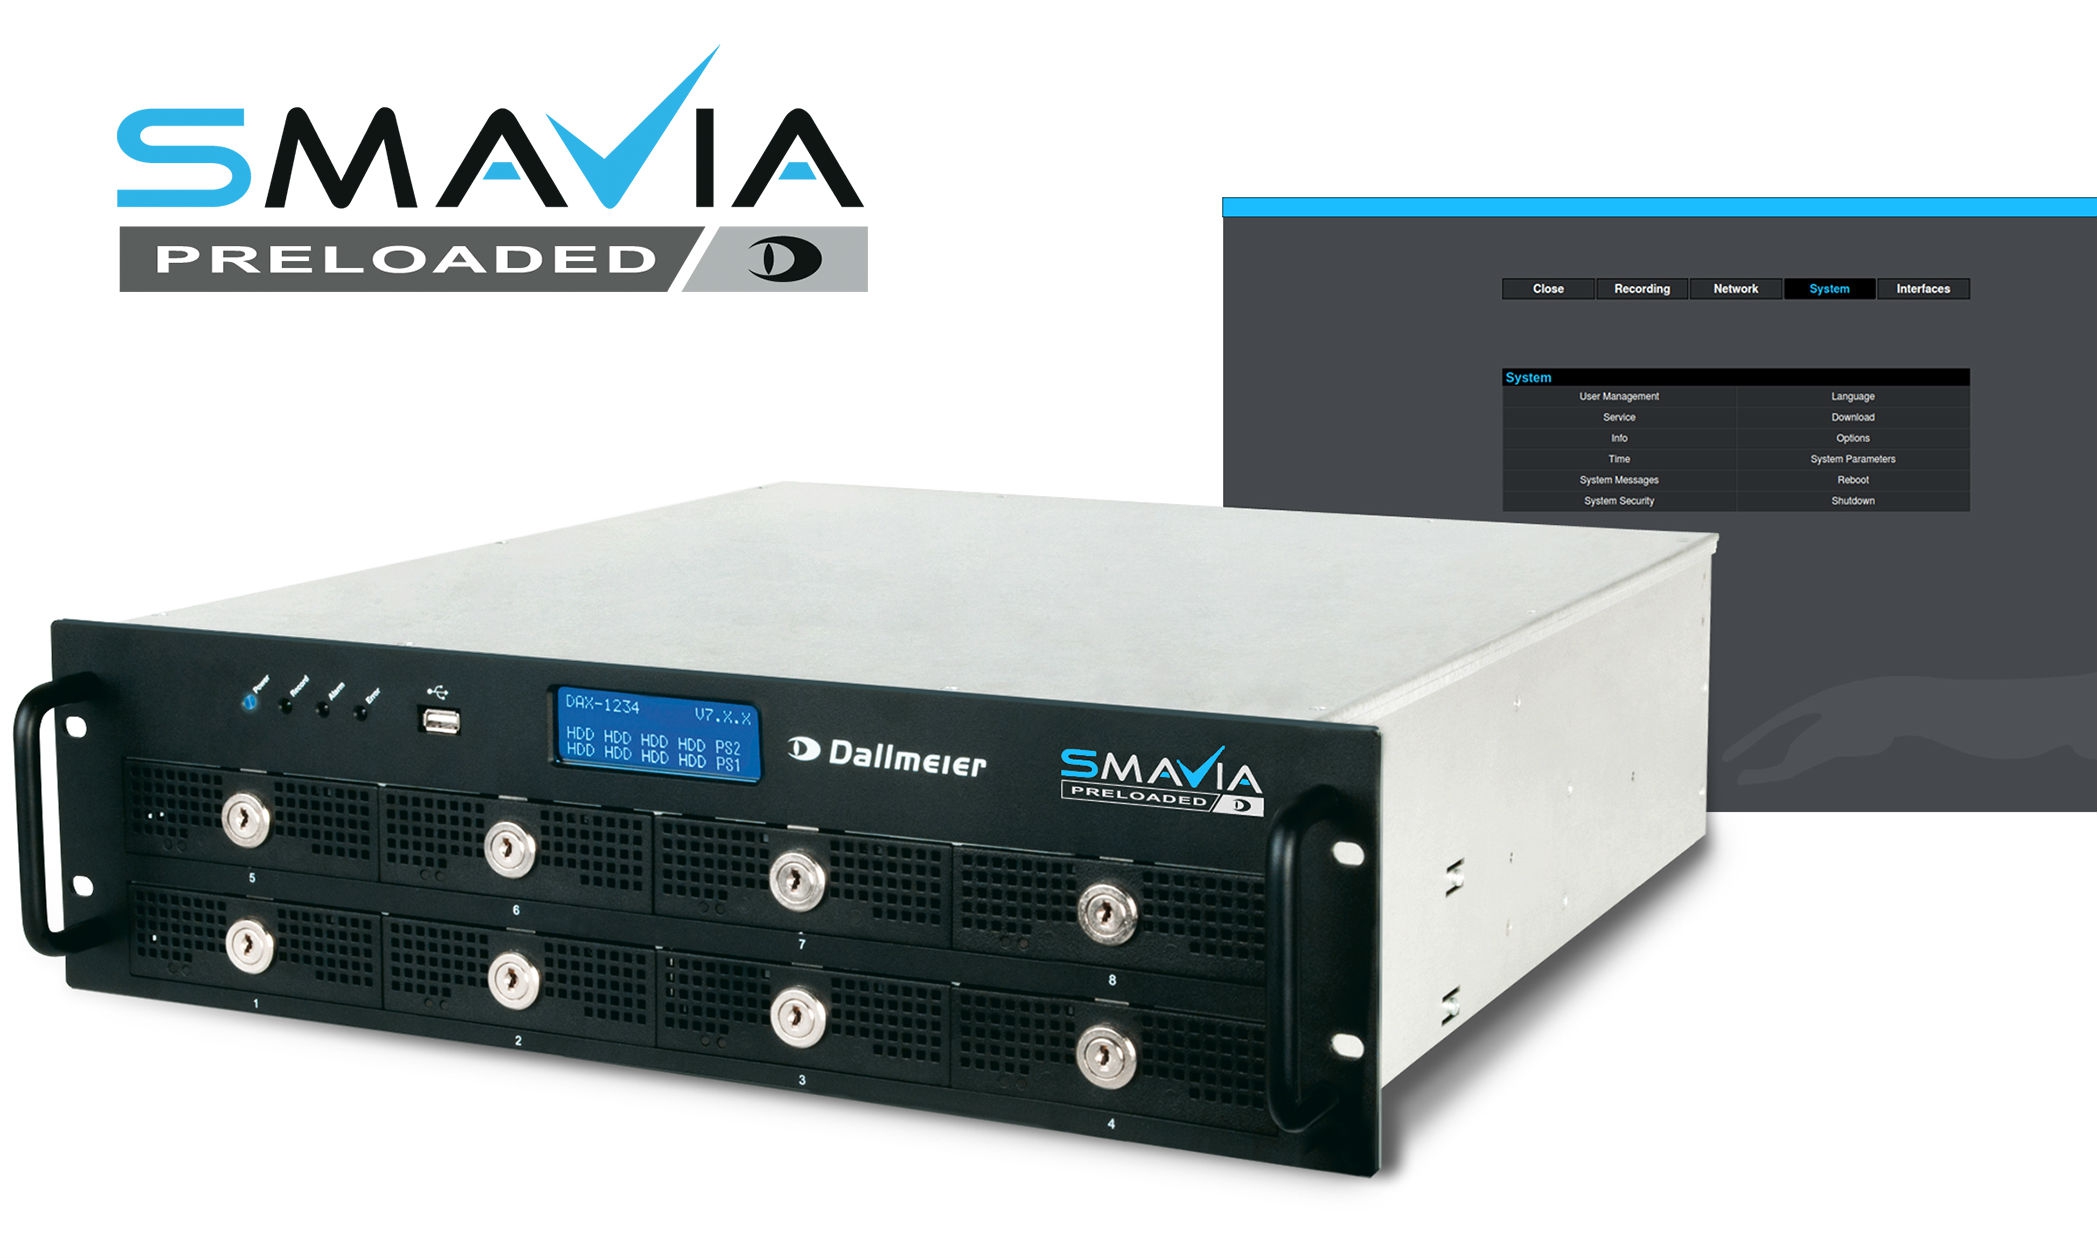 With the IPS 10000 Dallmeier presents a new video appliance for the recording of up to 100 HD video channels